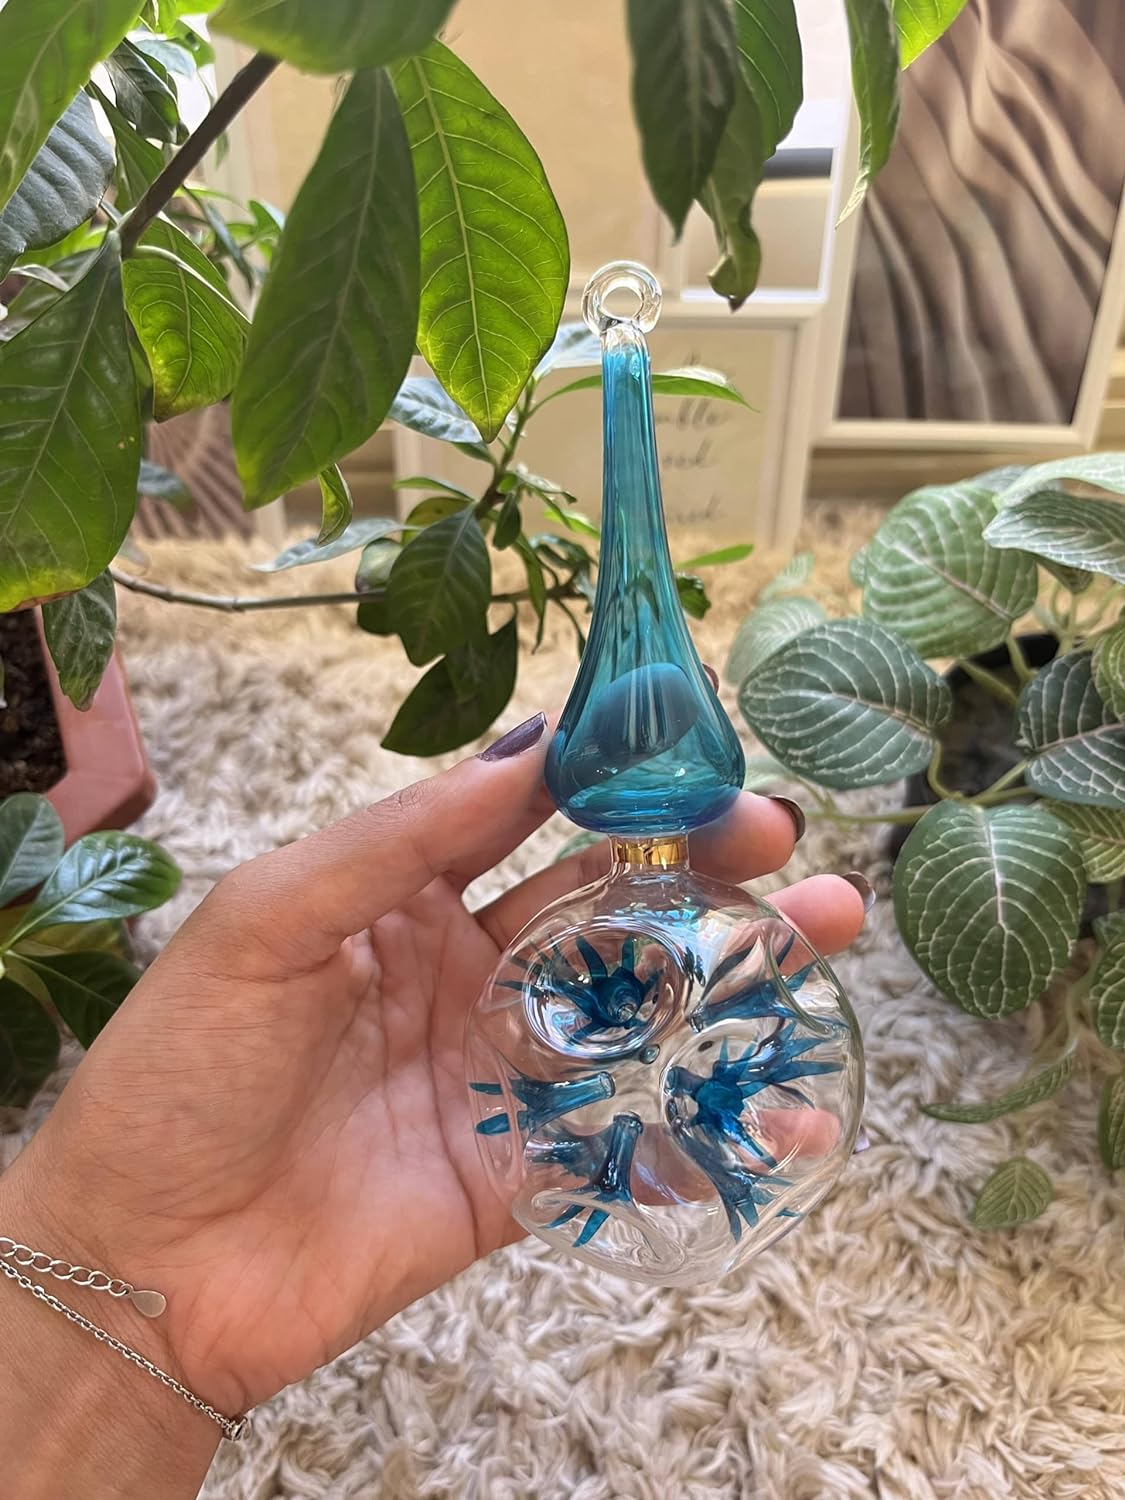 Double Layer Turquoise Hand-Blown Glass Christmas Ornament for Xmas Decorations - Les Trois PyramideDouble Layer Turquoise Hand-Blown Glass Christmas Ornament for Xmas Decorations - Les Trois Pyramides